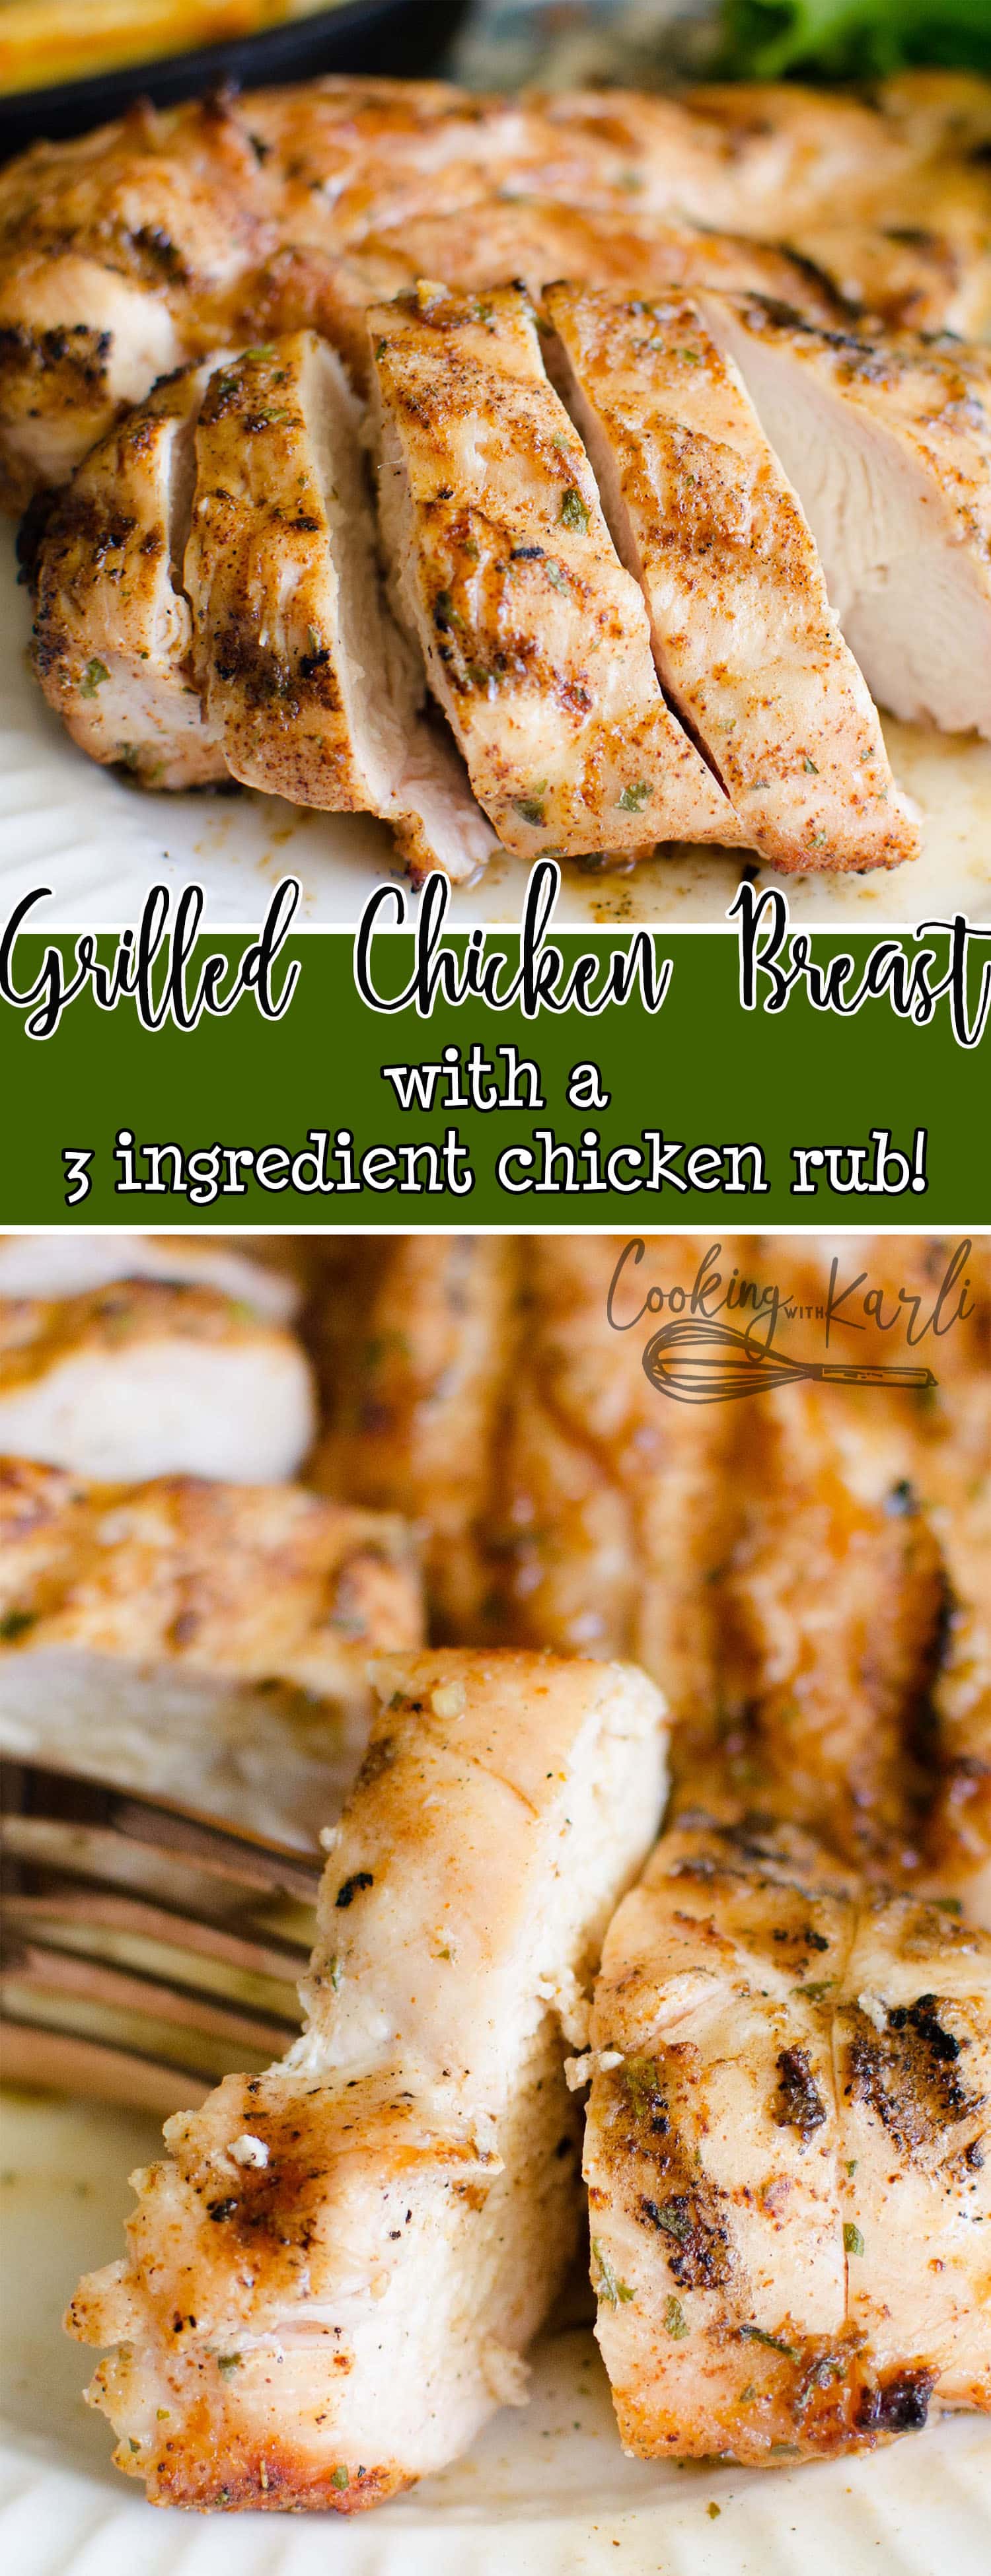 Grilled Chicken with a 3 Ingredient Homemade Rub is fast, easy and delicious. This all-purpose Chicken and Rub is great on it's own, in a salad or as a sandwich! The Rub is made with seasoning packets which makes it super easy and full of flavor. |Cooking with Karli| #chicken #grill #dryrub #rub #chickenrub #summer #grilledchicken